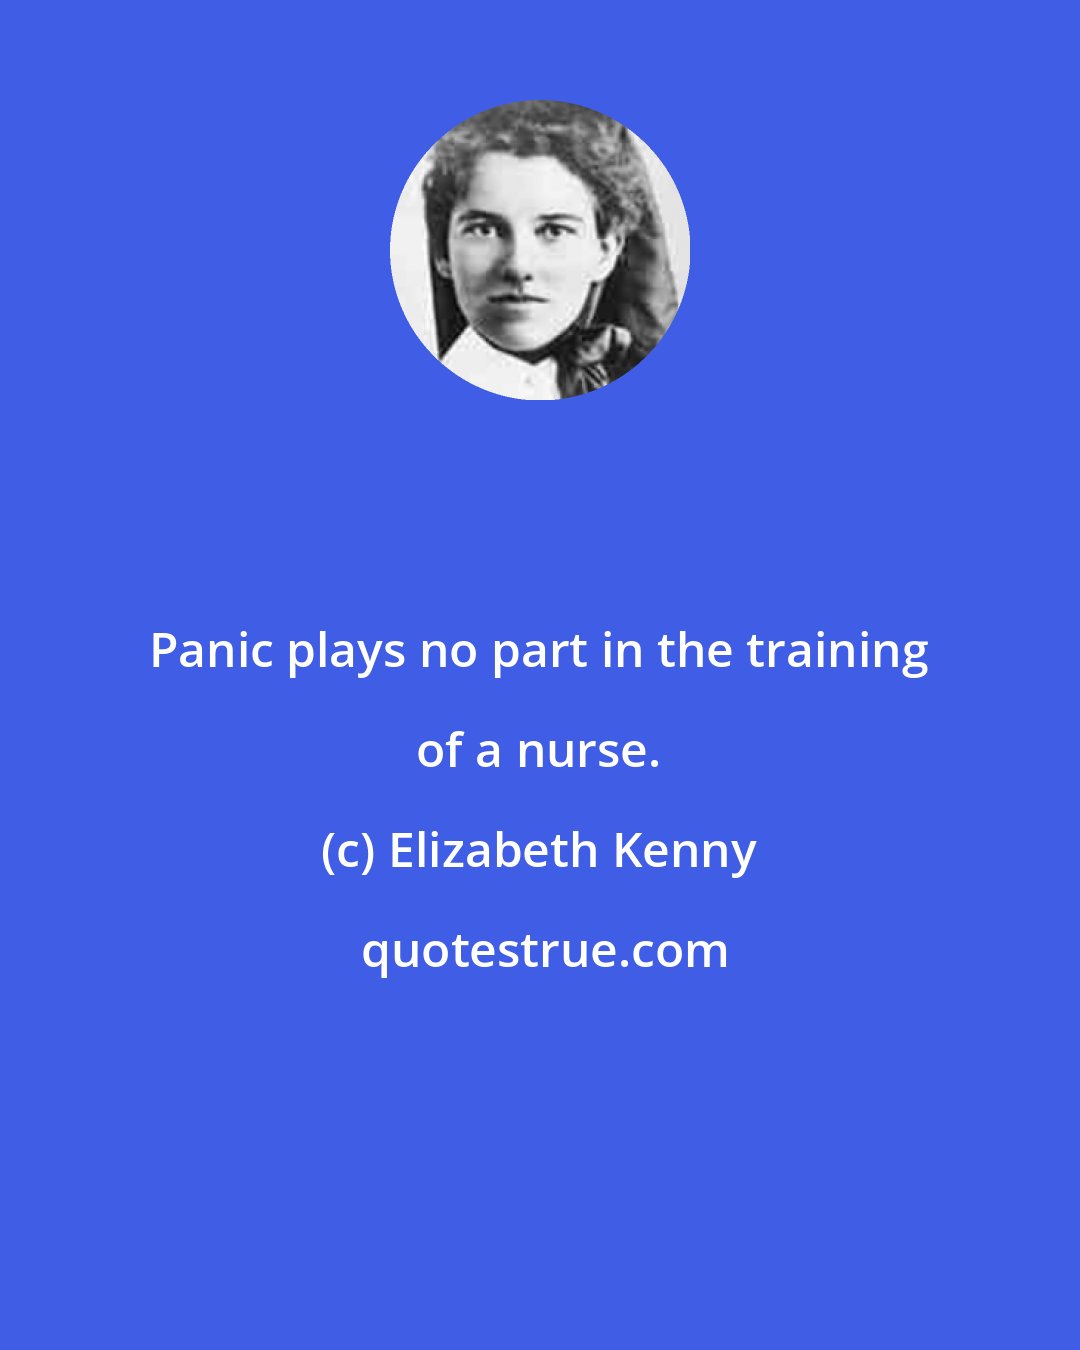 Elizabeth Kenny: Panic plays no part in the training of a nurse.